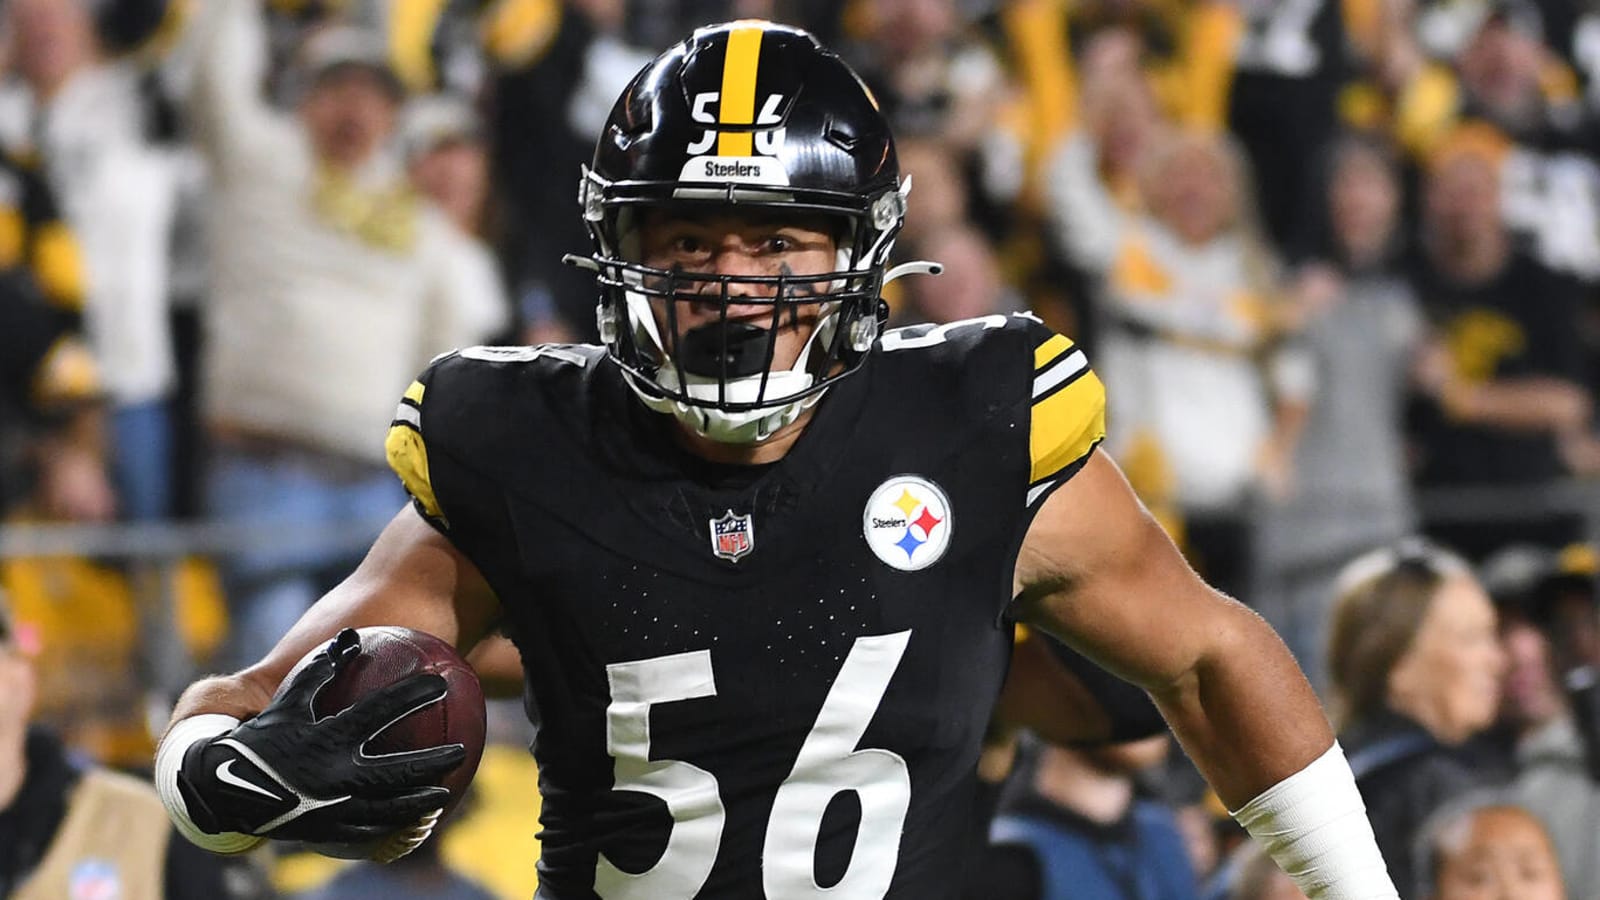 Steelers OLB Alex Highsmith questionable to return after going down with neck injury vs Patriots